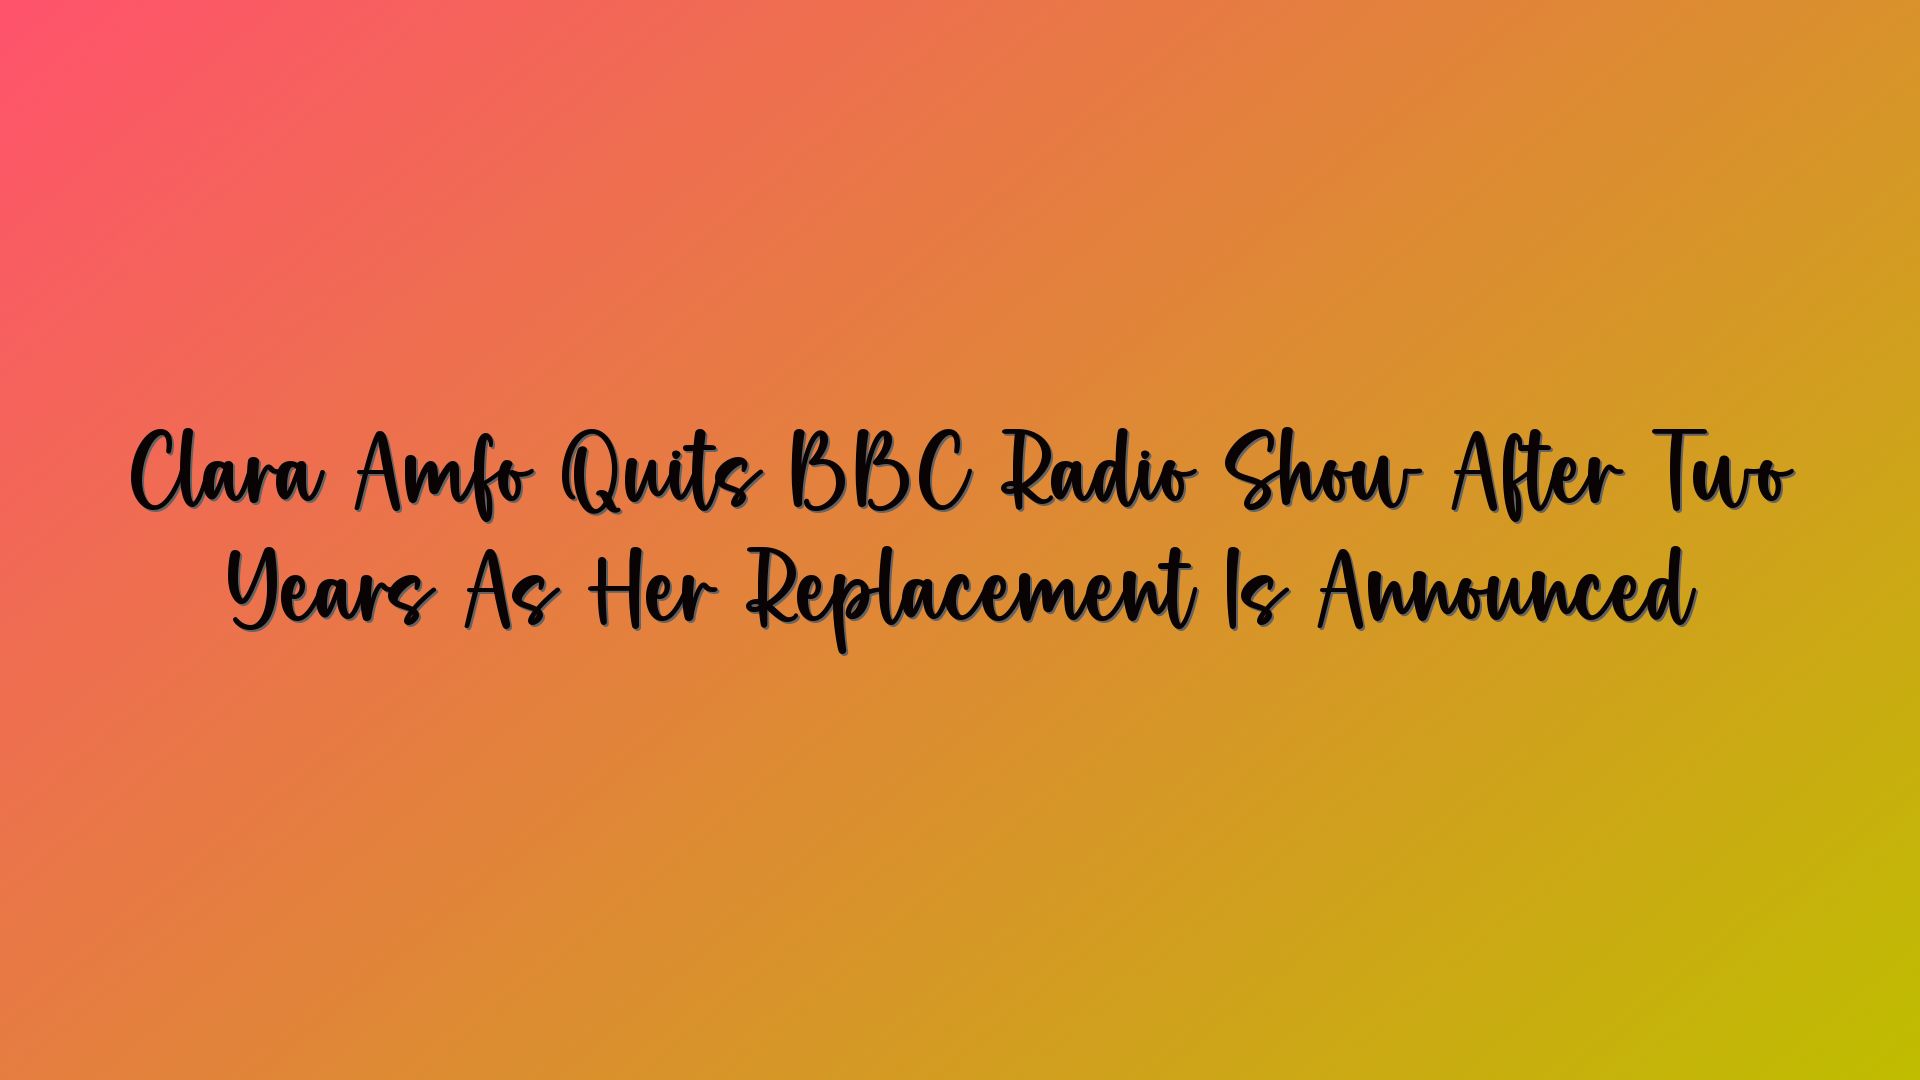 Clara Amfo Quits BBC Radio Show After Two Years As Her Replacement Is Announced